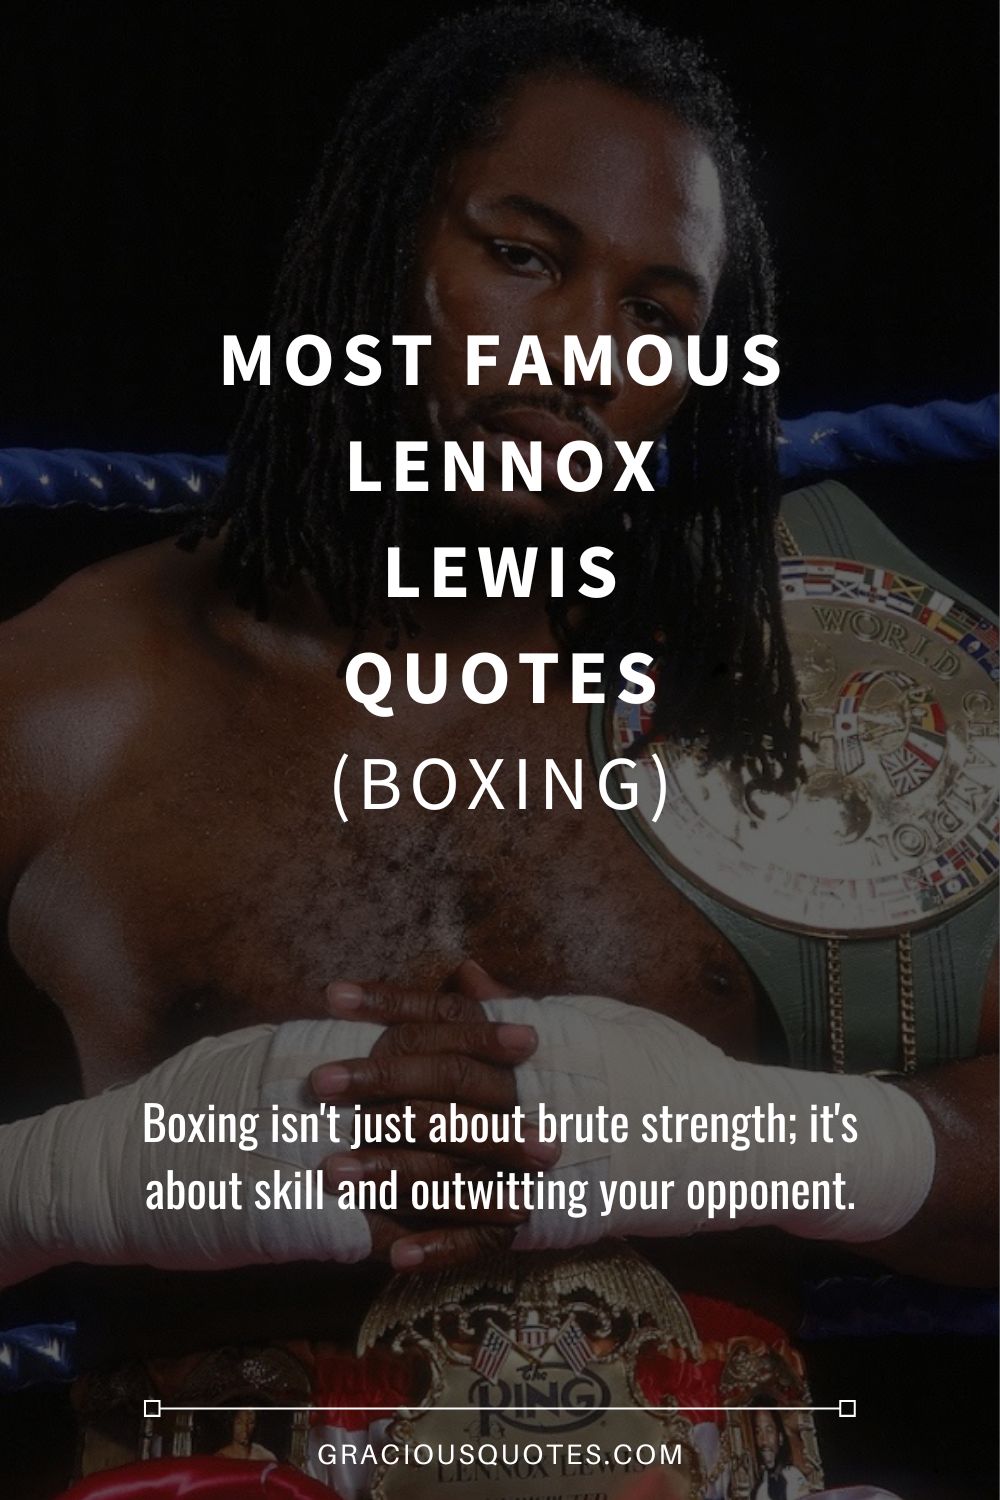 Most Famous Lennox Lewis Quotes (BOXING) - Gracious Quotes